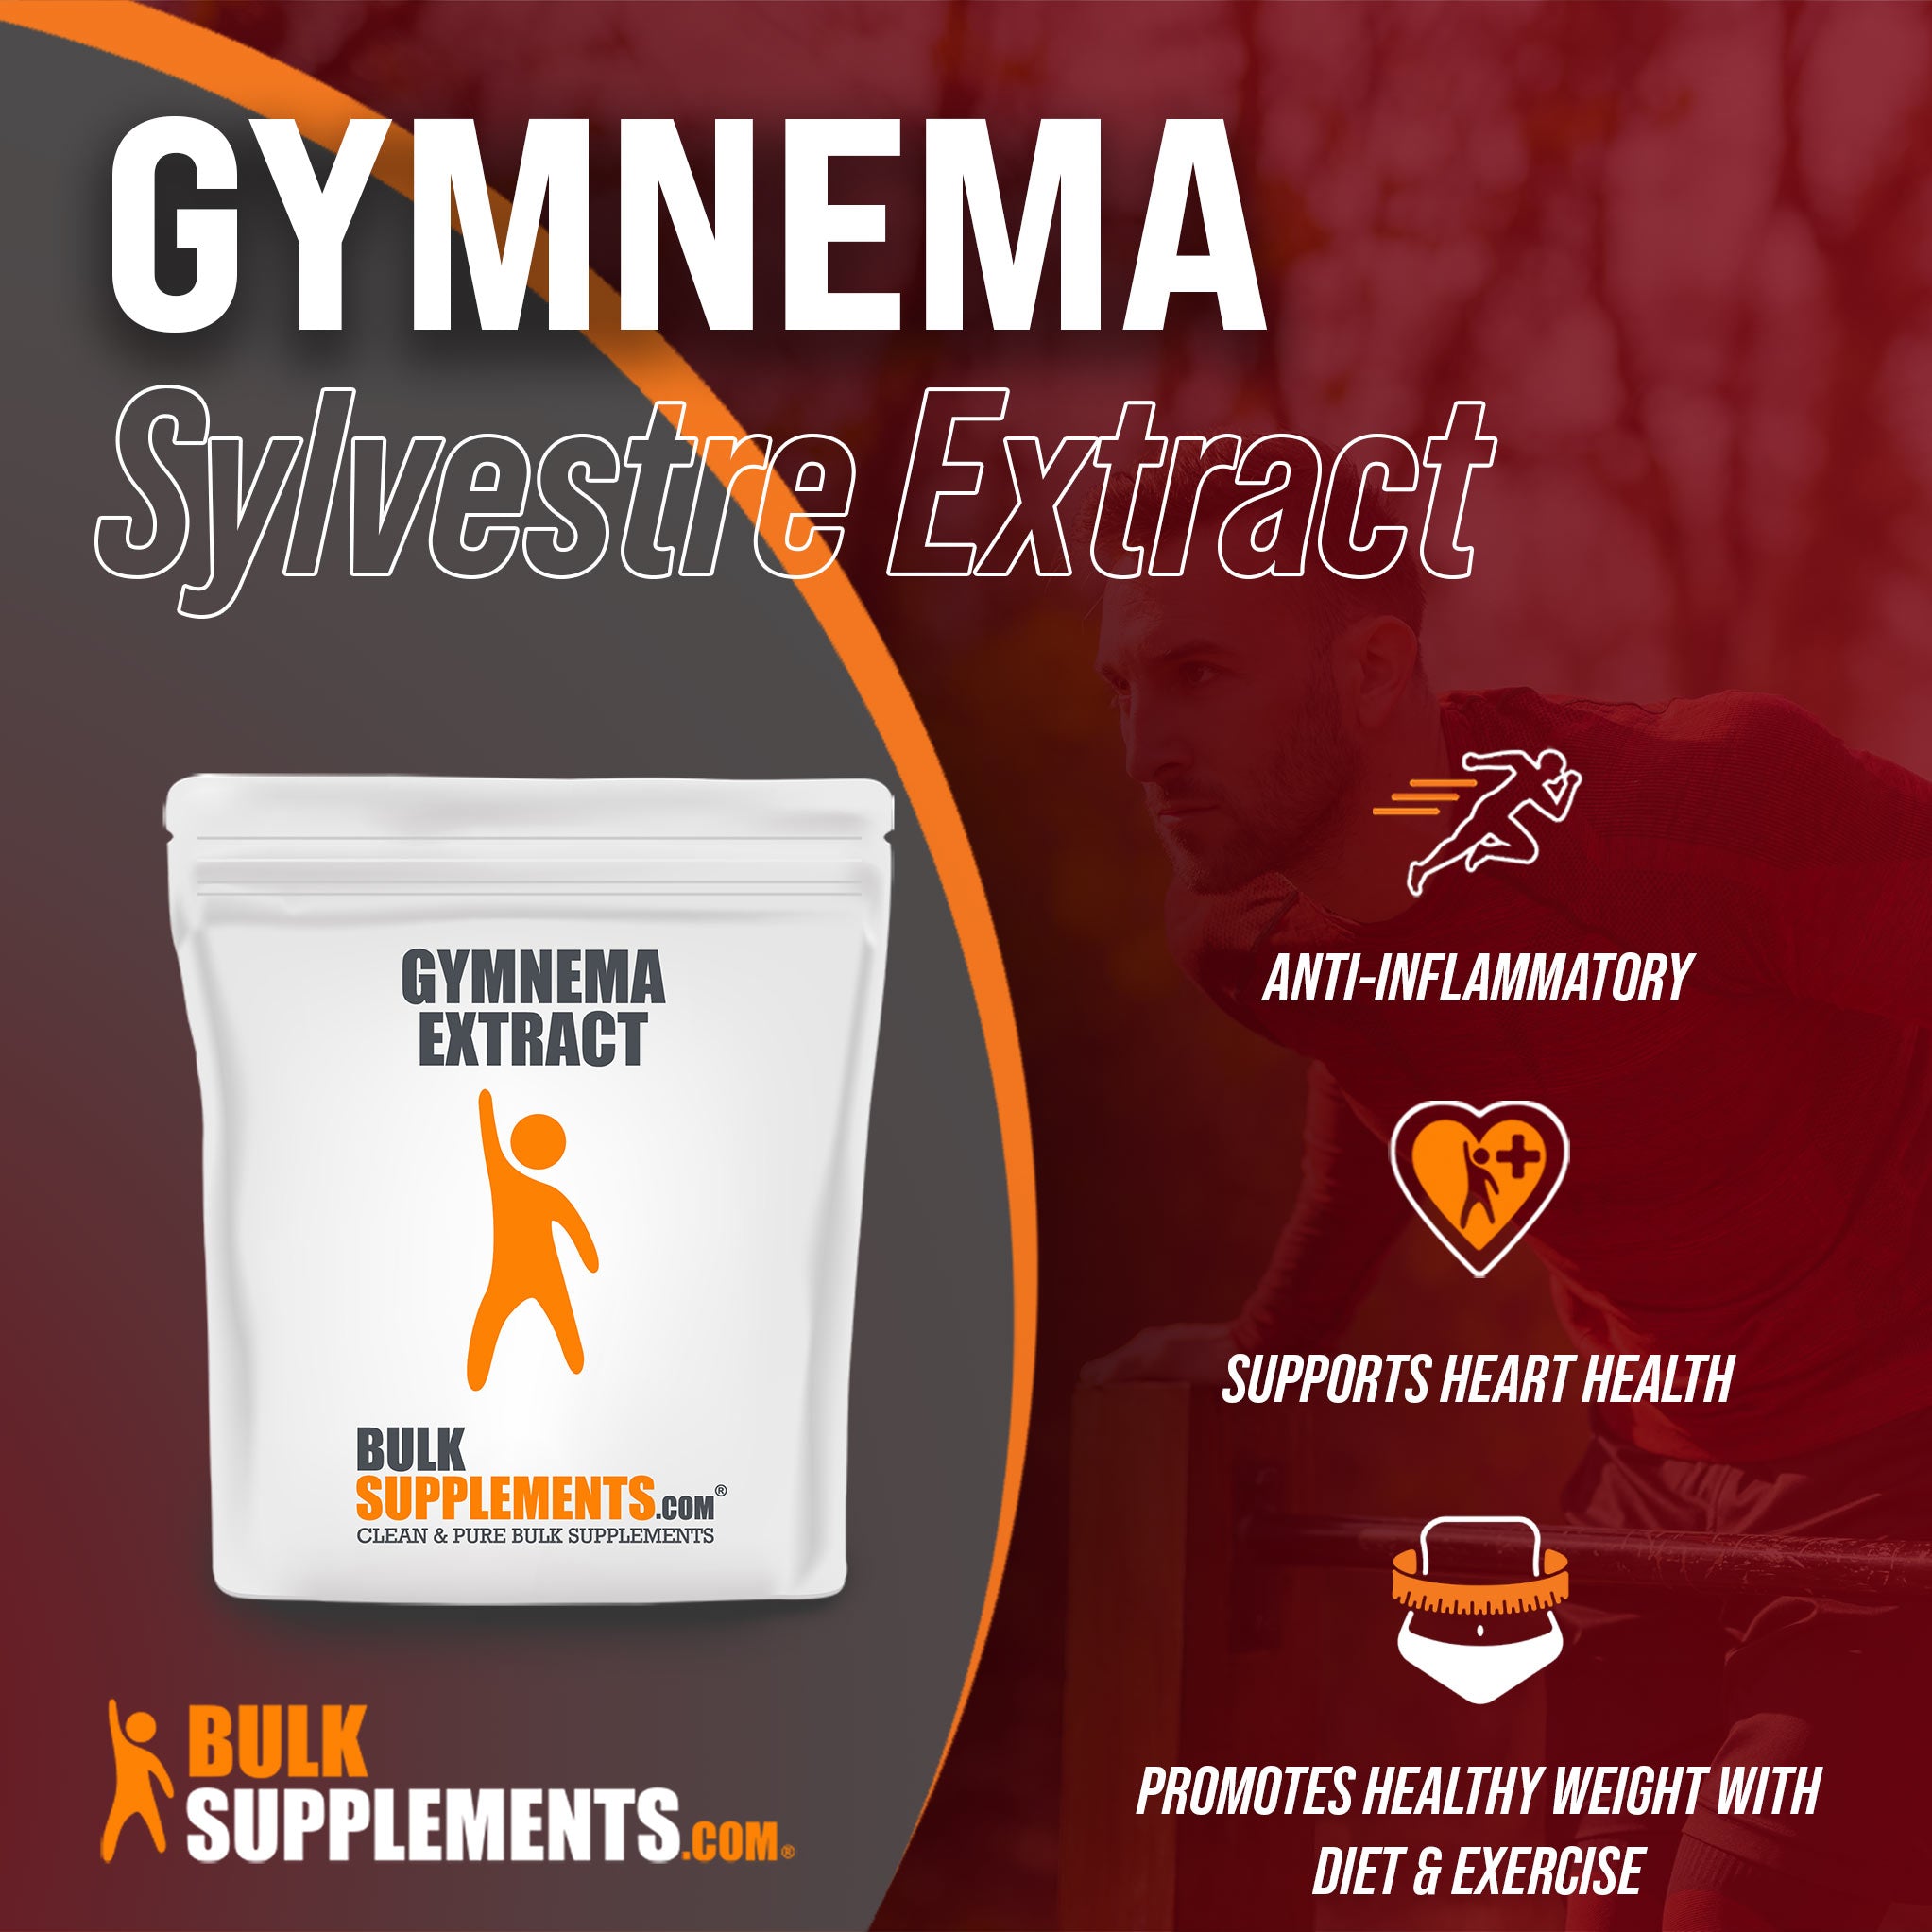 Benefits of Gymnema Extract; anti-inflammatory, supports heart health, promotes healthy weight with diet and exercise